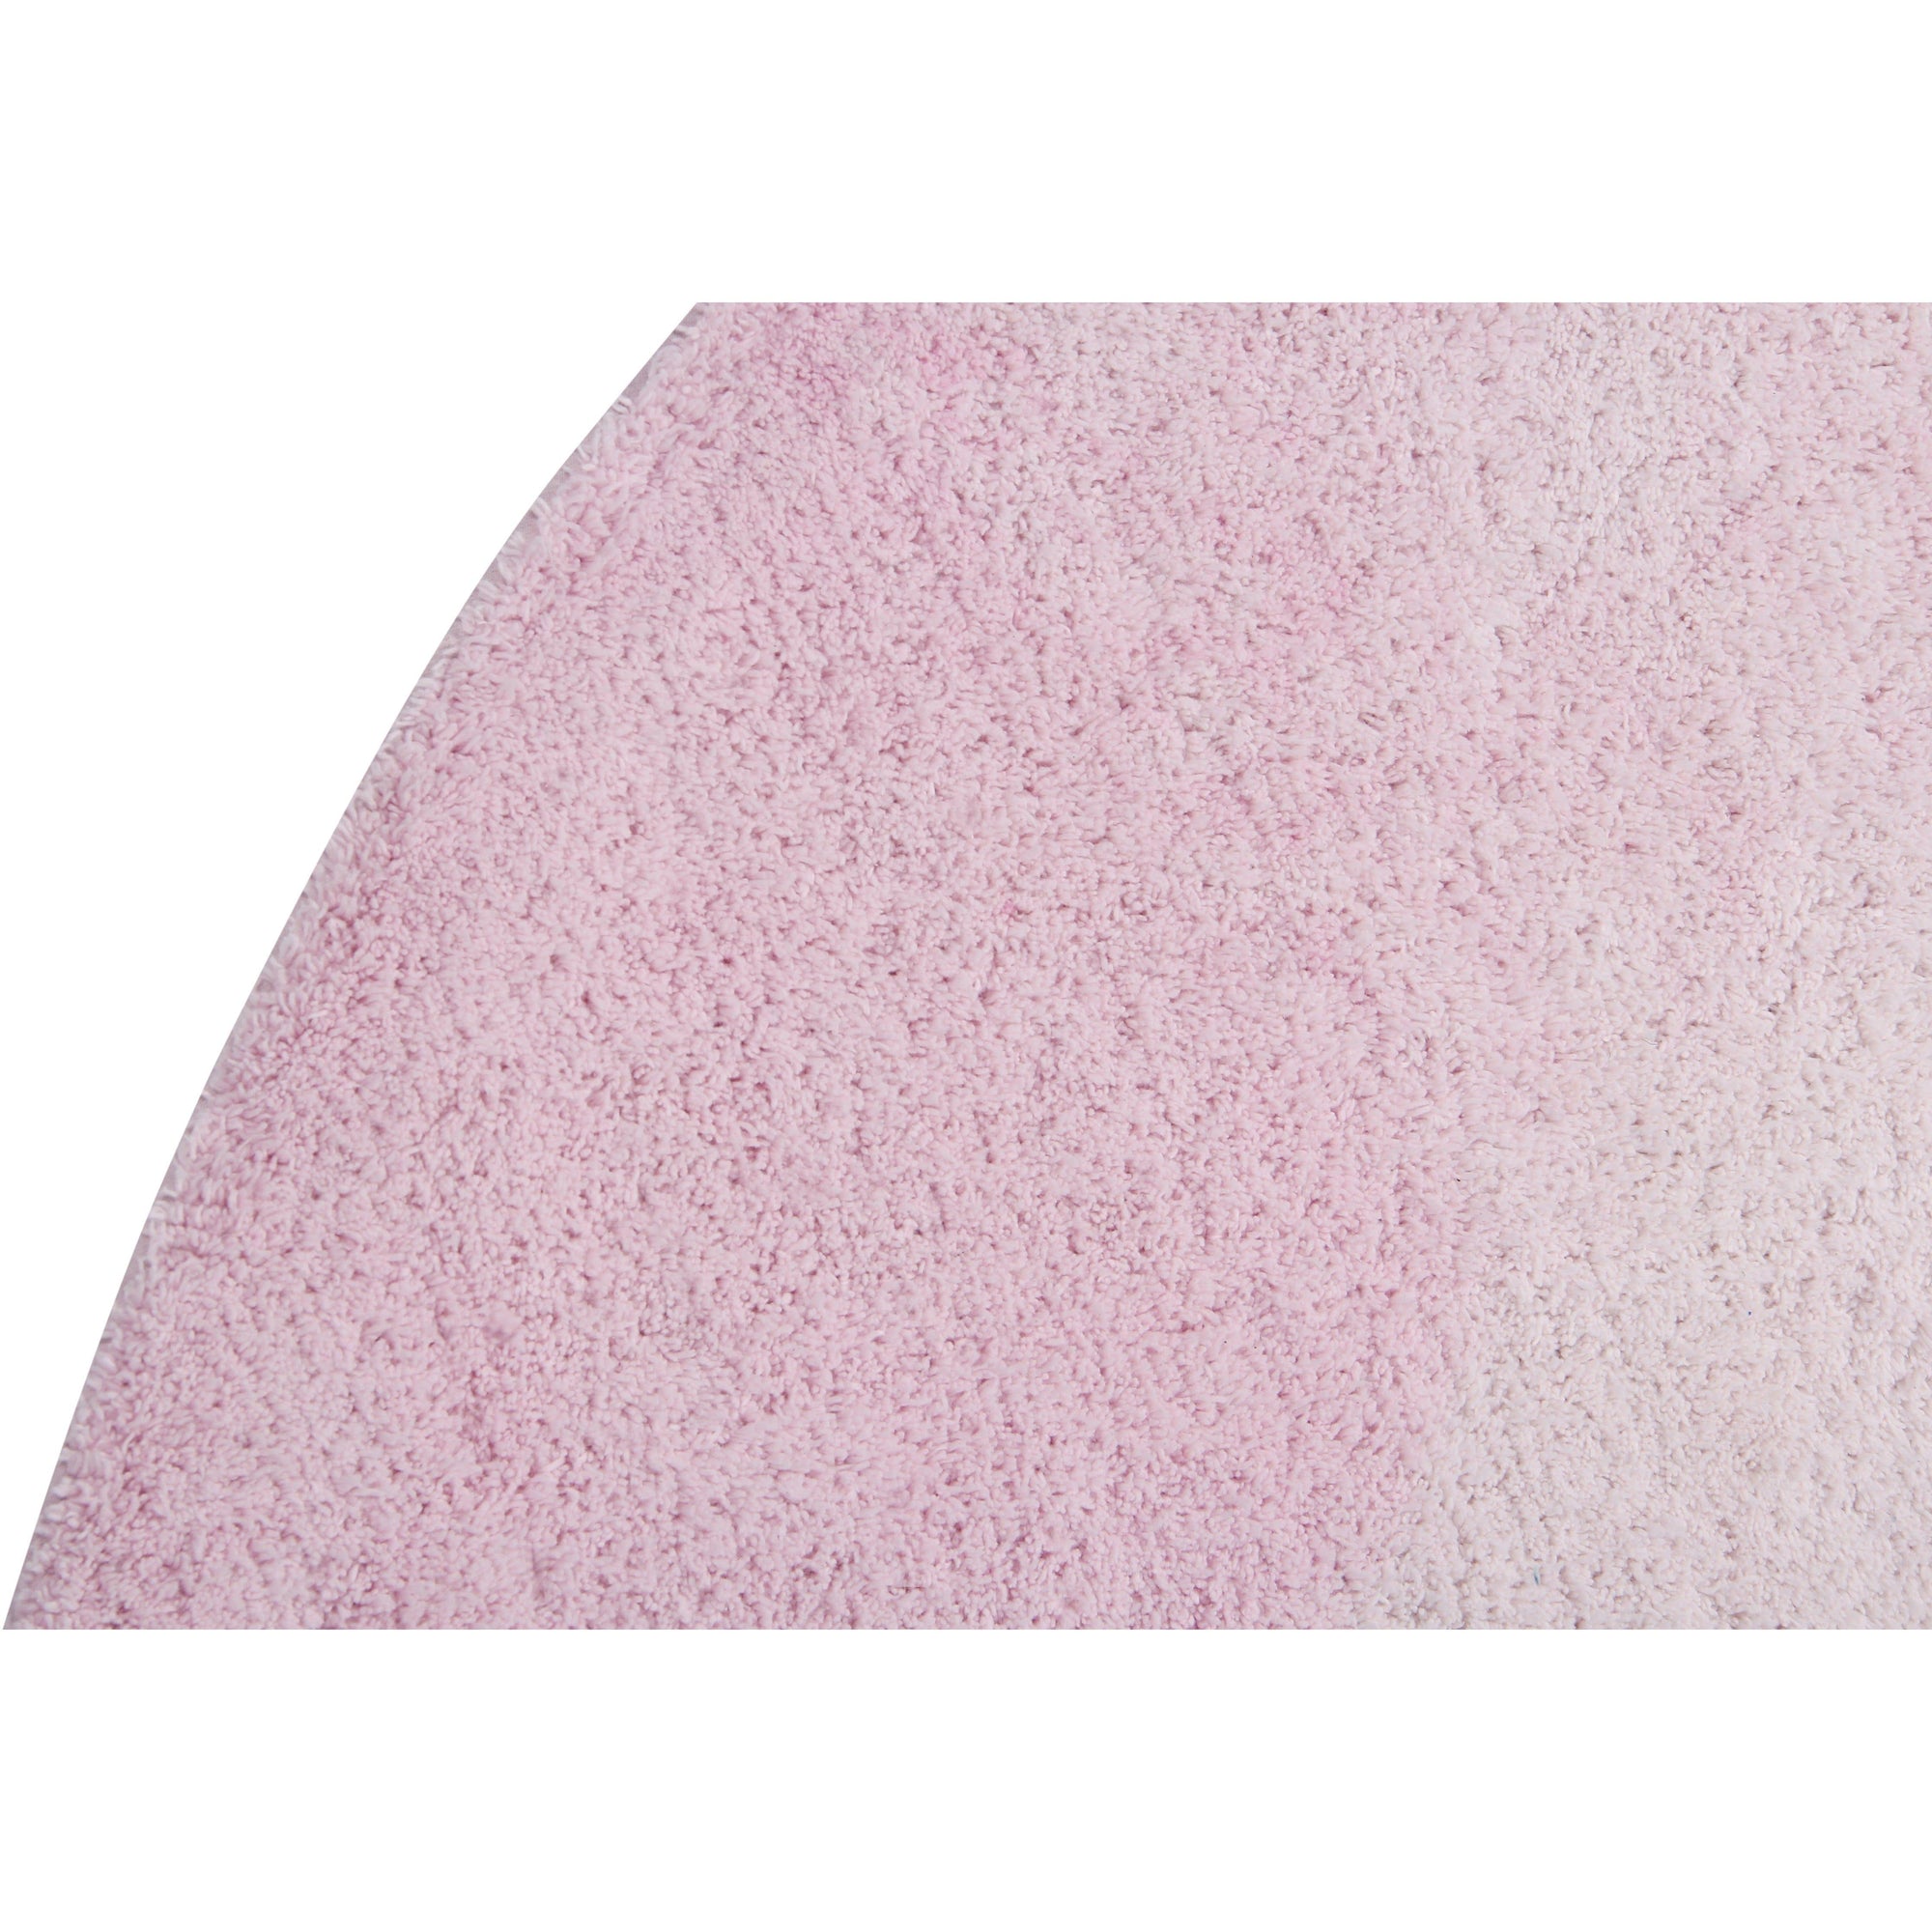 Rugs by Roo | Lorena Canals Machine Washable Tie Dye Pink Round Rug-C-TIE-PK